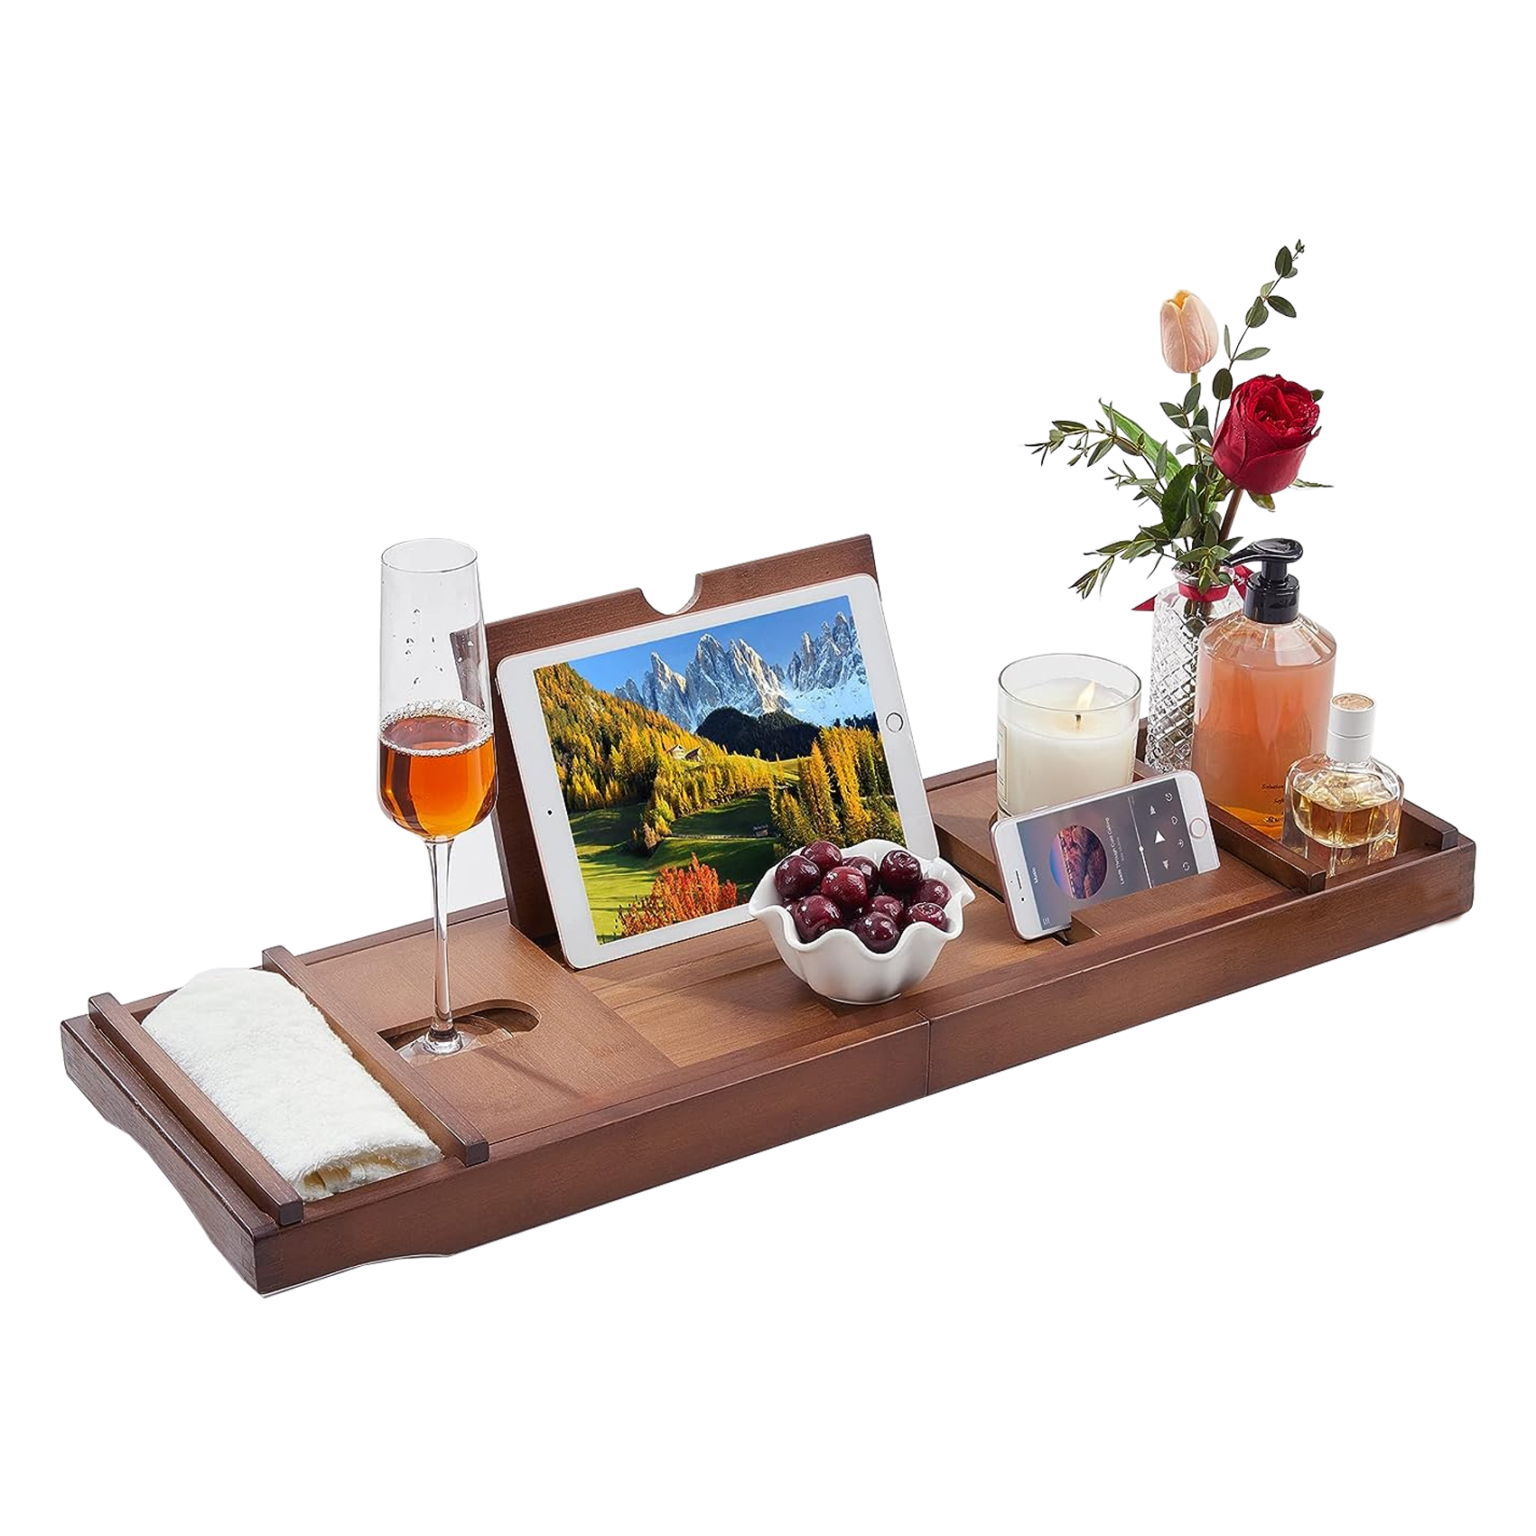 Bath Tray for Bathtub with Candle, Wine Glass, Book, iPad & Phone Holders gift guide